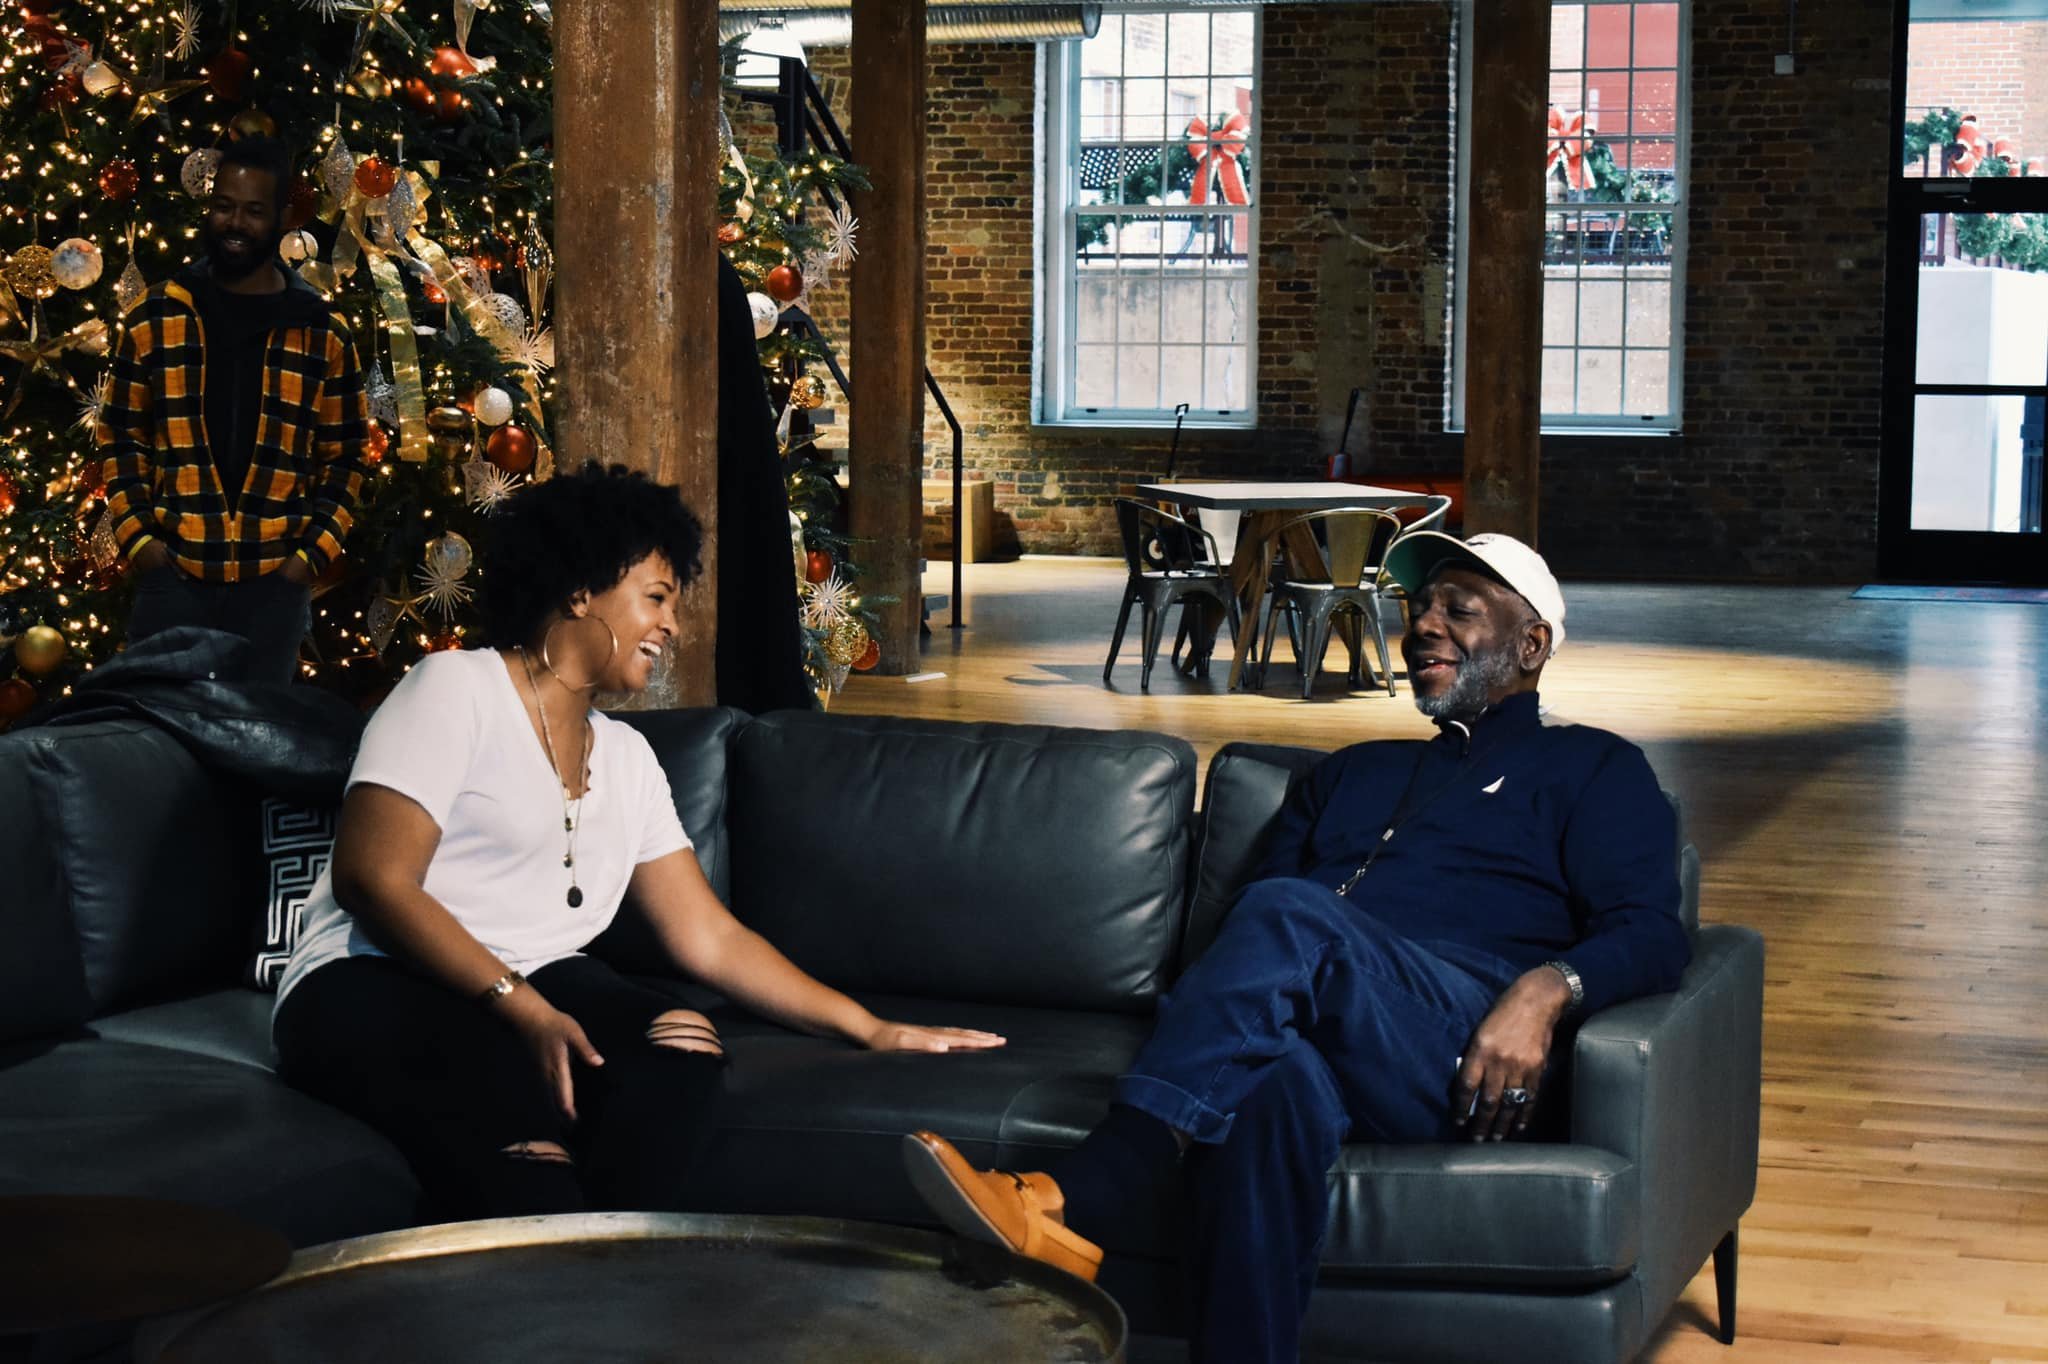  One of the beautiful aspects of the project is the relationships that are formed during their process. Here BLP Director Tonya Jefferson Lynch enjoys the storytelling of participant Michael Wright, known as Coach Mike for the decades he spent coachi